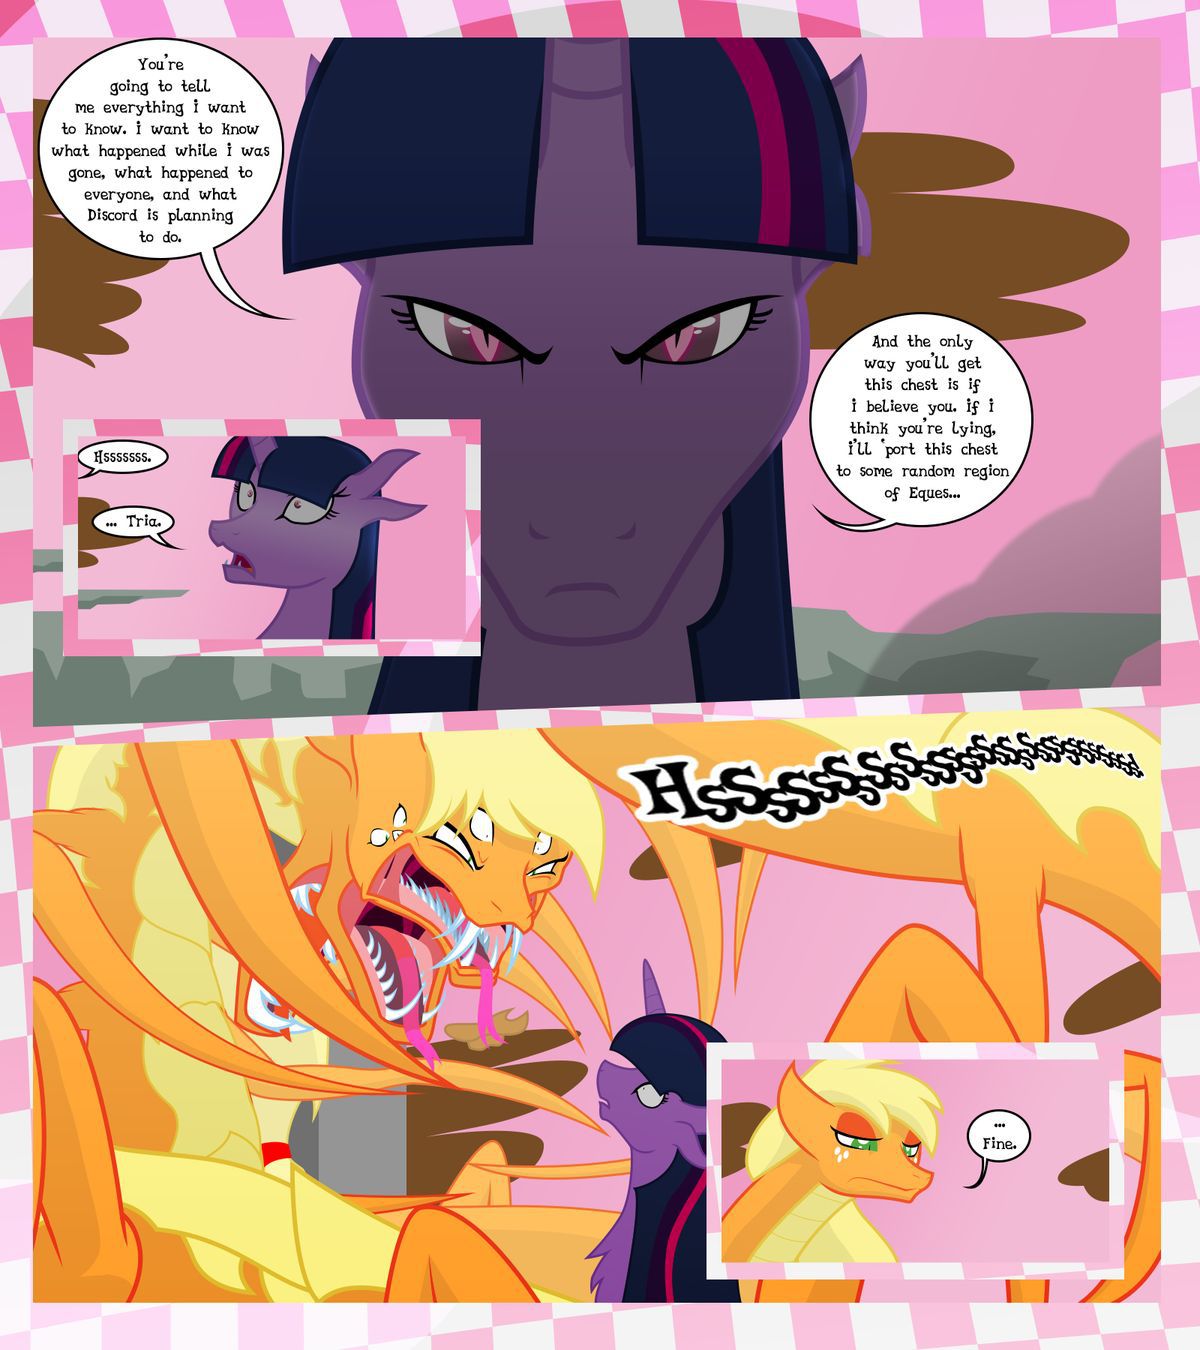 [GatesMcCloud] Cutie Mark Crusaders 10k: Chapter 3 - The Lost (My Little Pony: Friendship is Magic) [English] [Ongoing] 56